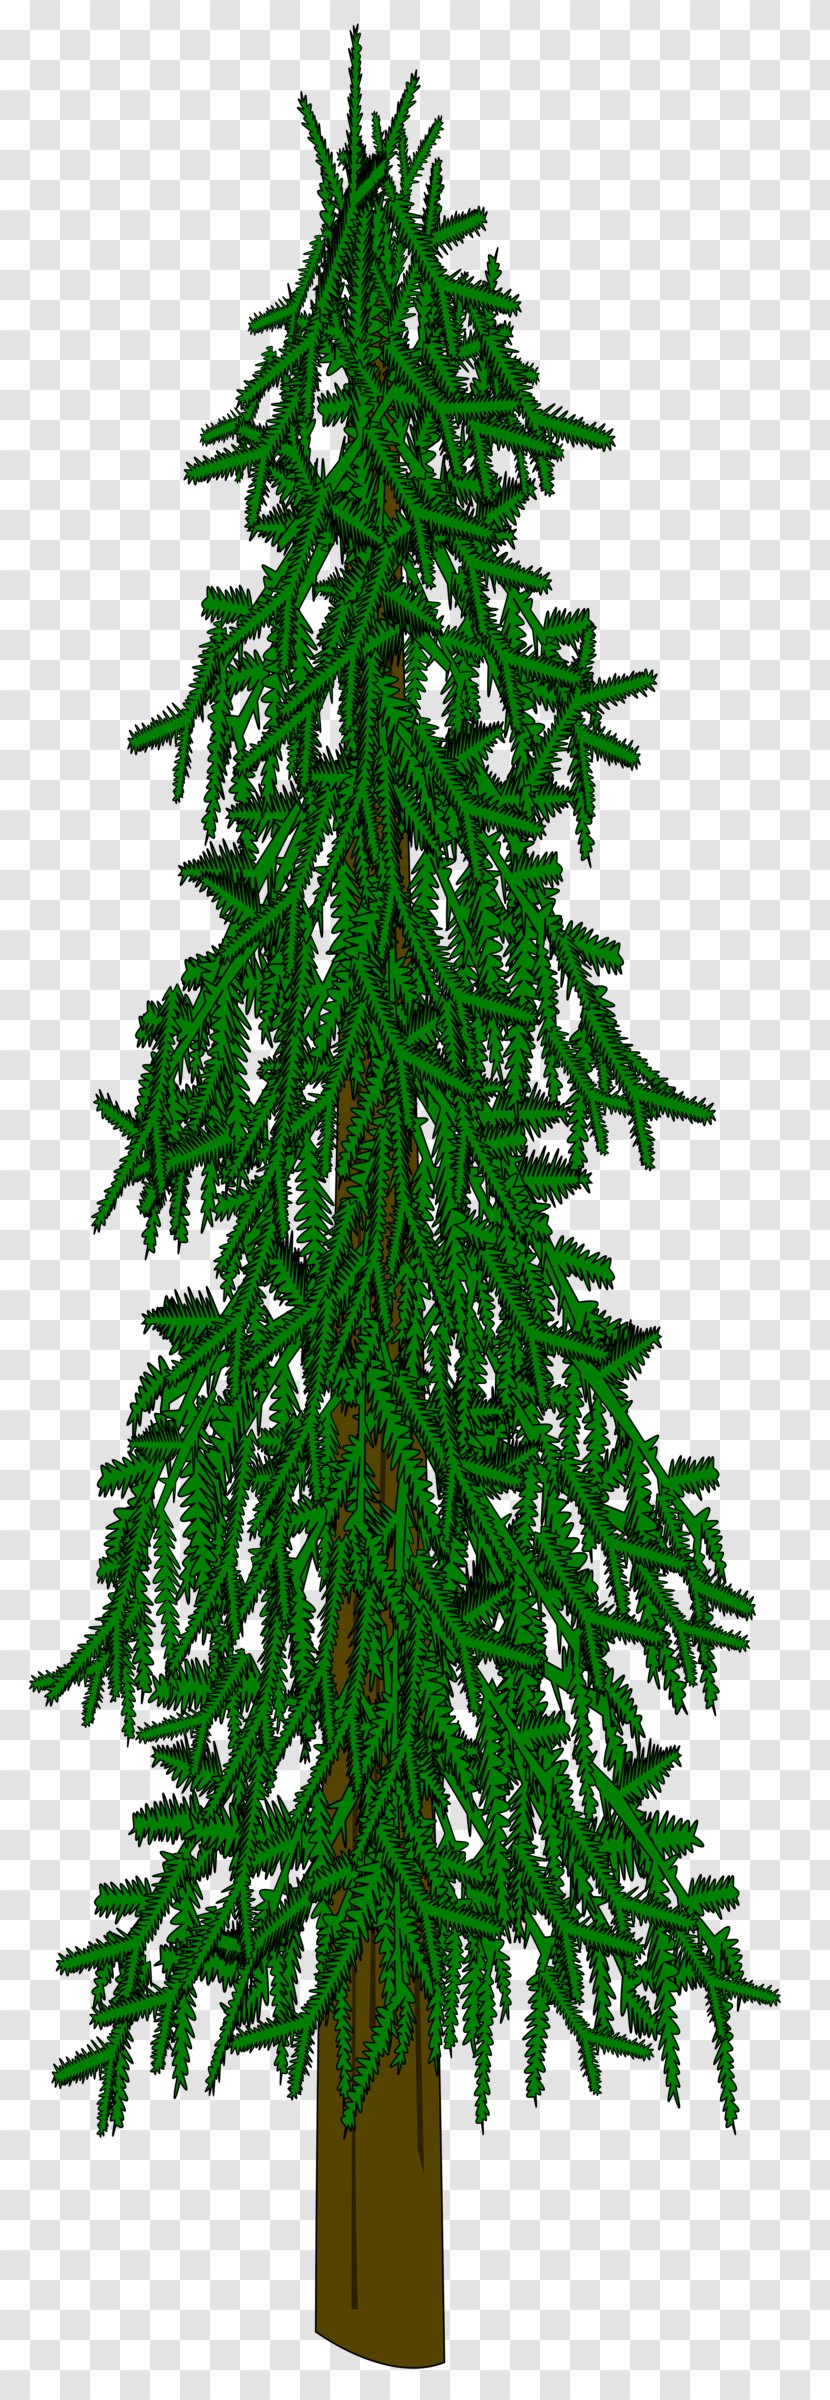 Evergreen Tree Conifers Fir Spruce - Forest Transparent PNG